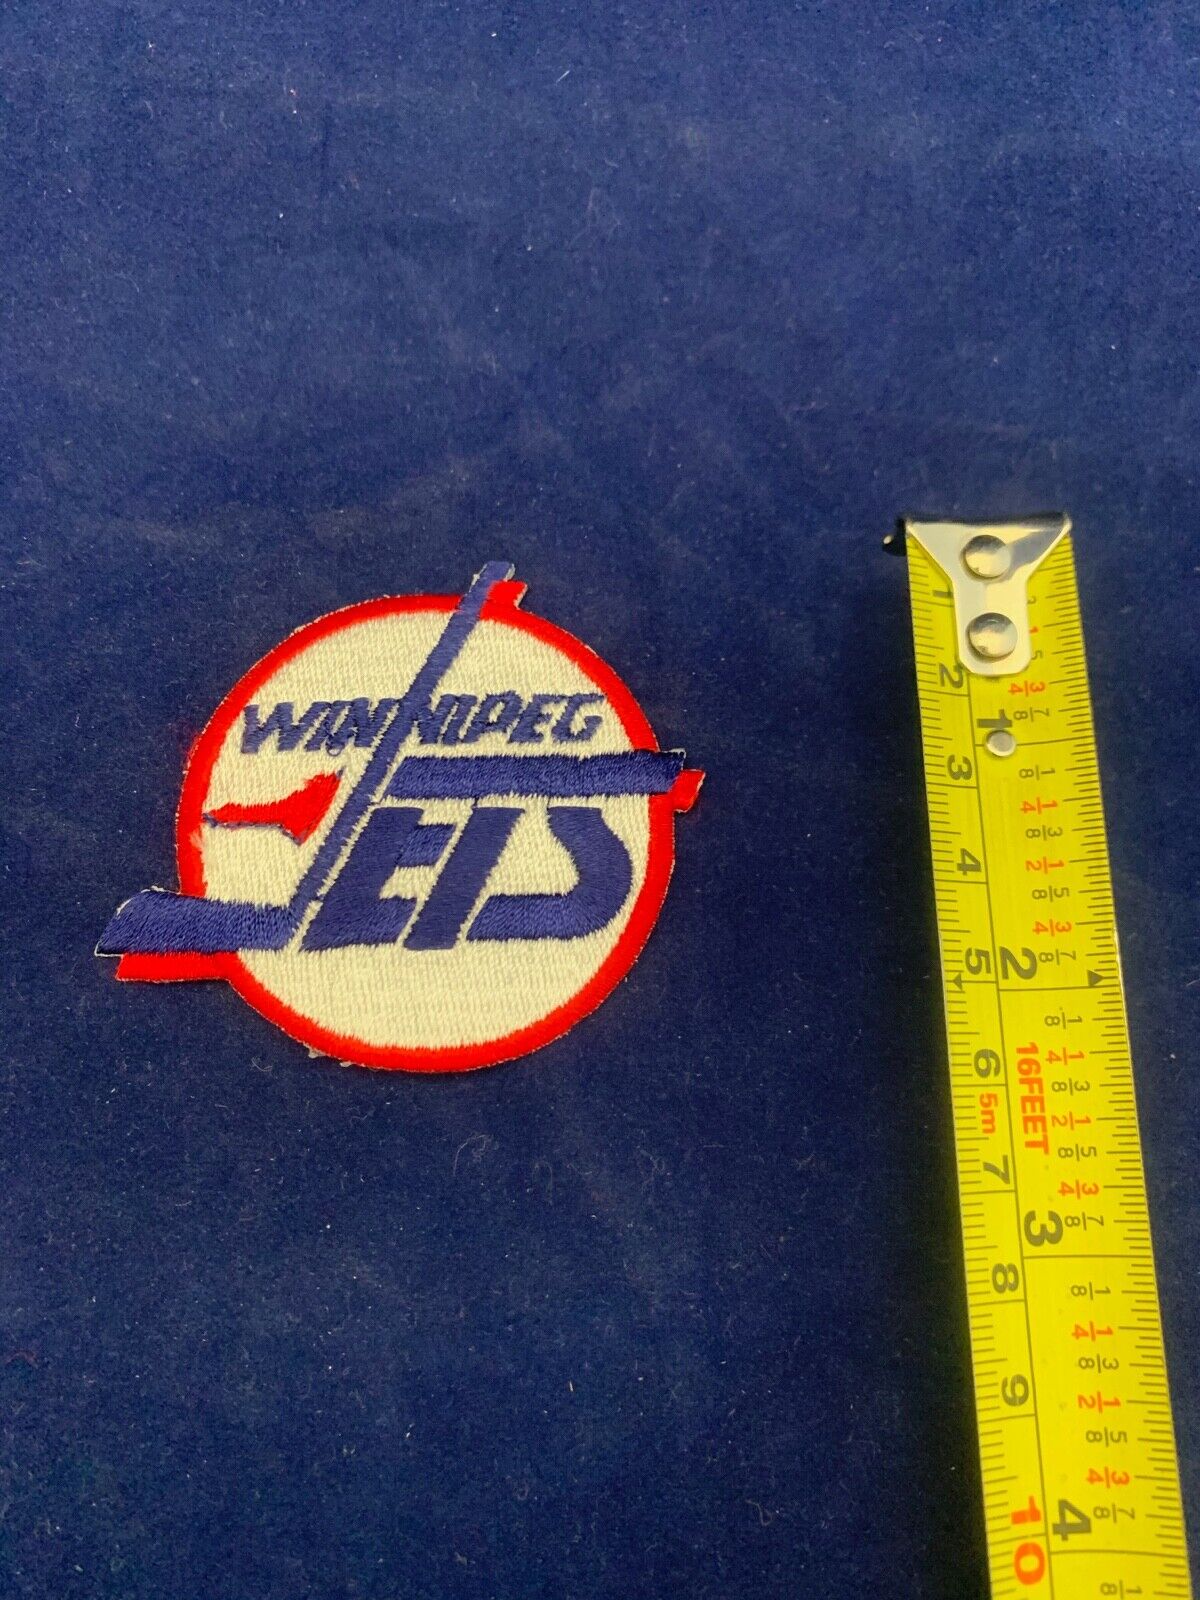 Winnipeg Jets Small Logo Patch Size 2.5 x 2.75 inches OLD LOGO